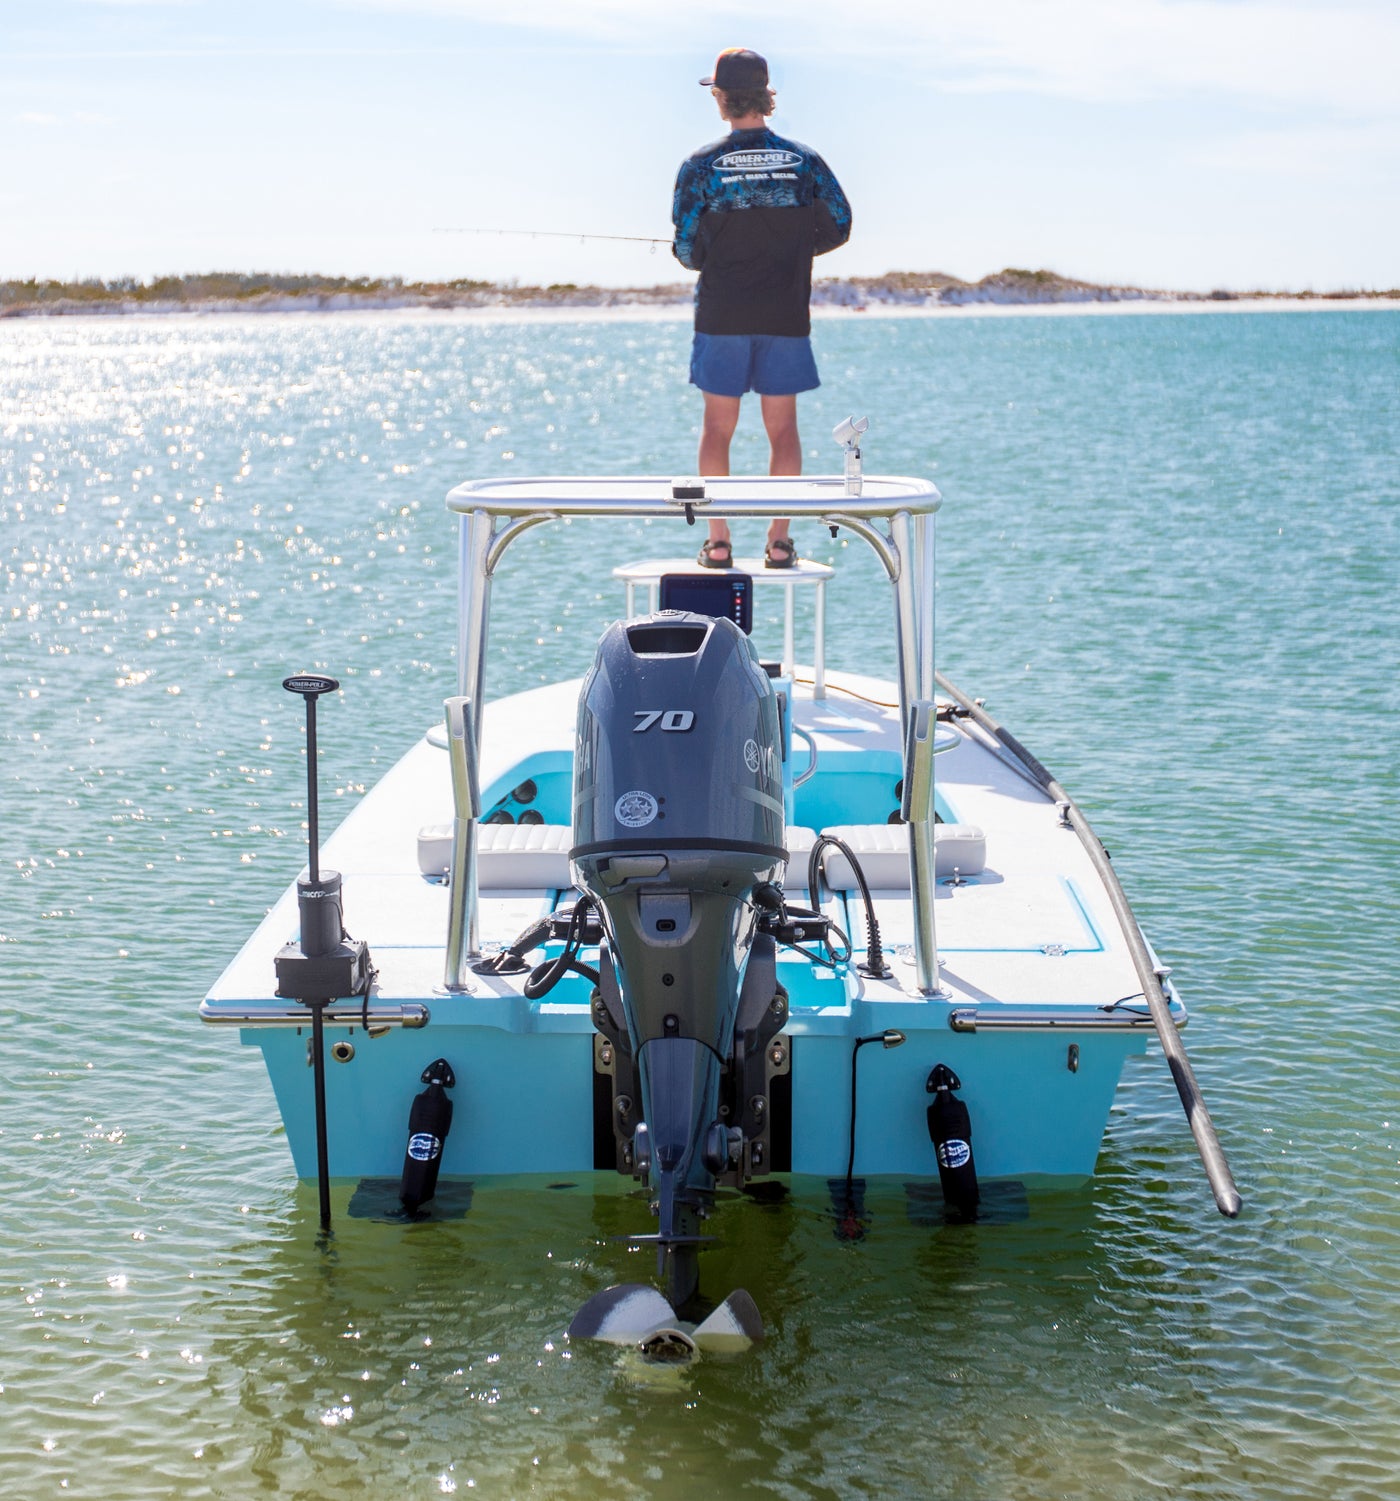 Should You Get a Power Pole for your Boat? - Cost vs. Benefits